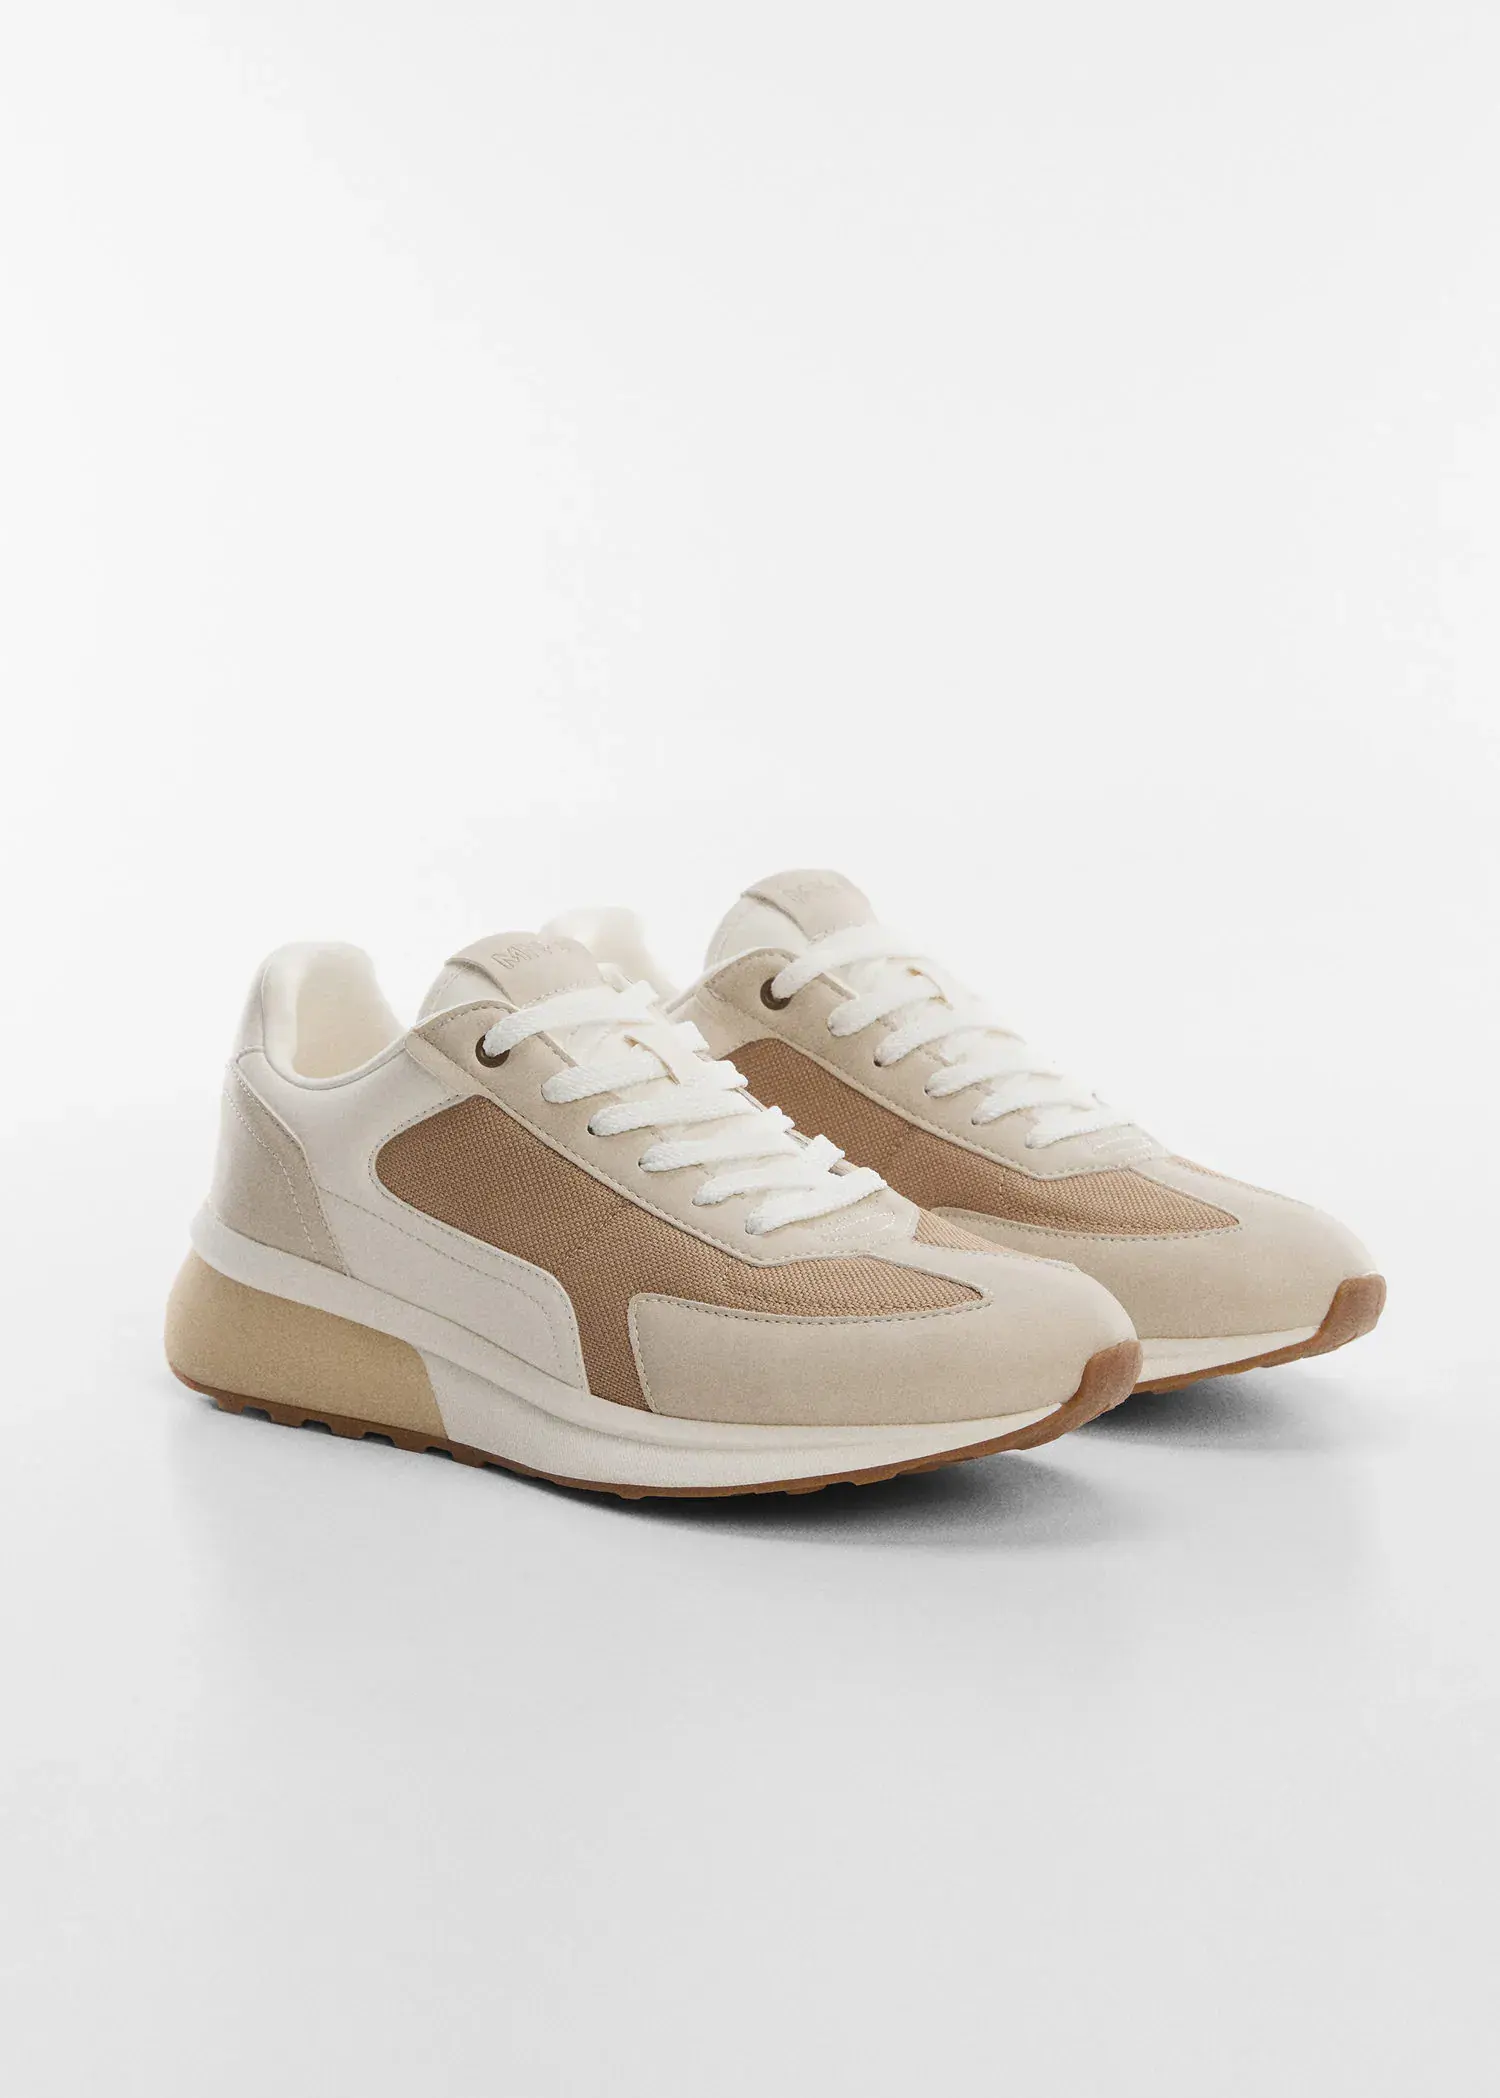 Mango Leather mixed sneakers. a pair of white and tan sneakers on a white surface. 